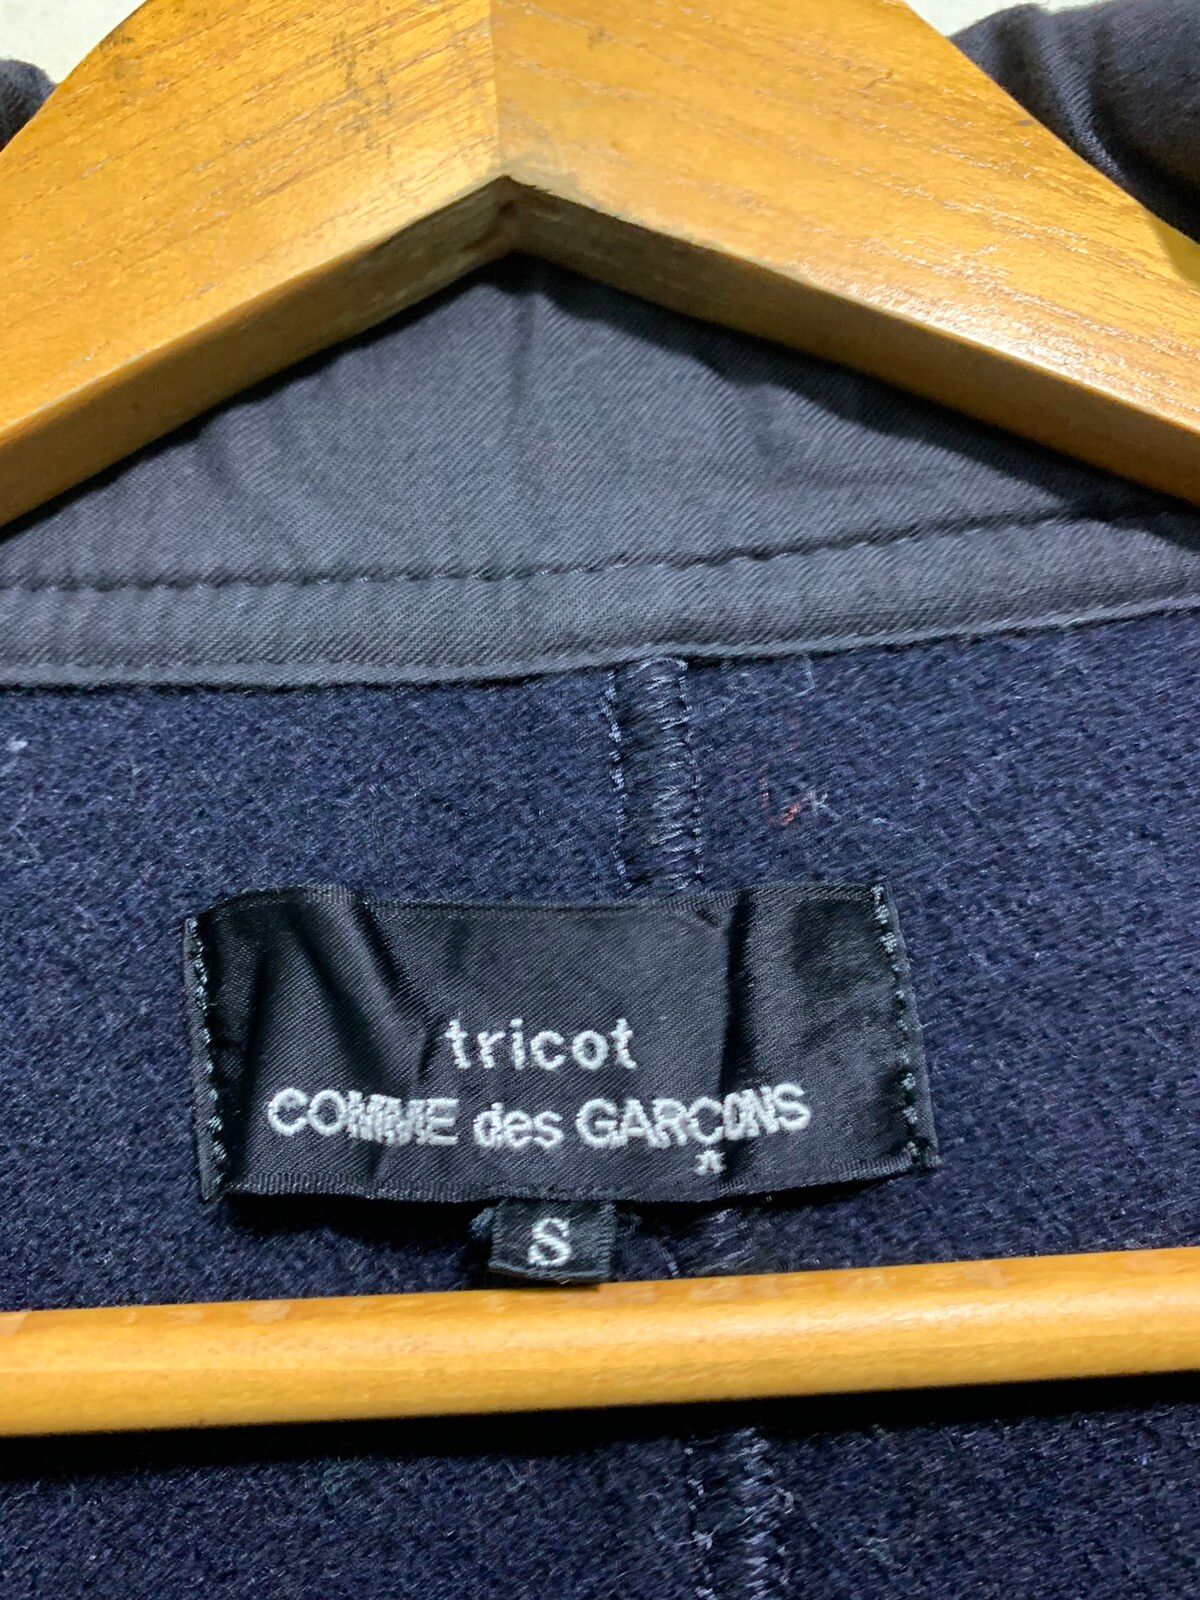 🔥TRICOTS CdG WOOL GOLD BUTTON JACKETS - 9